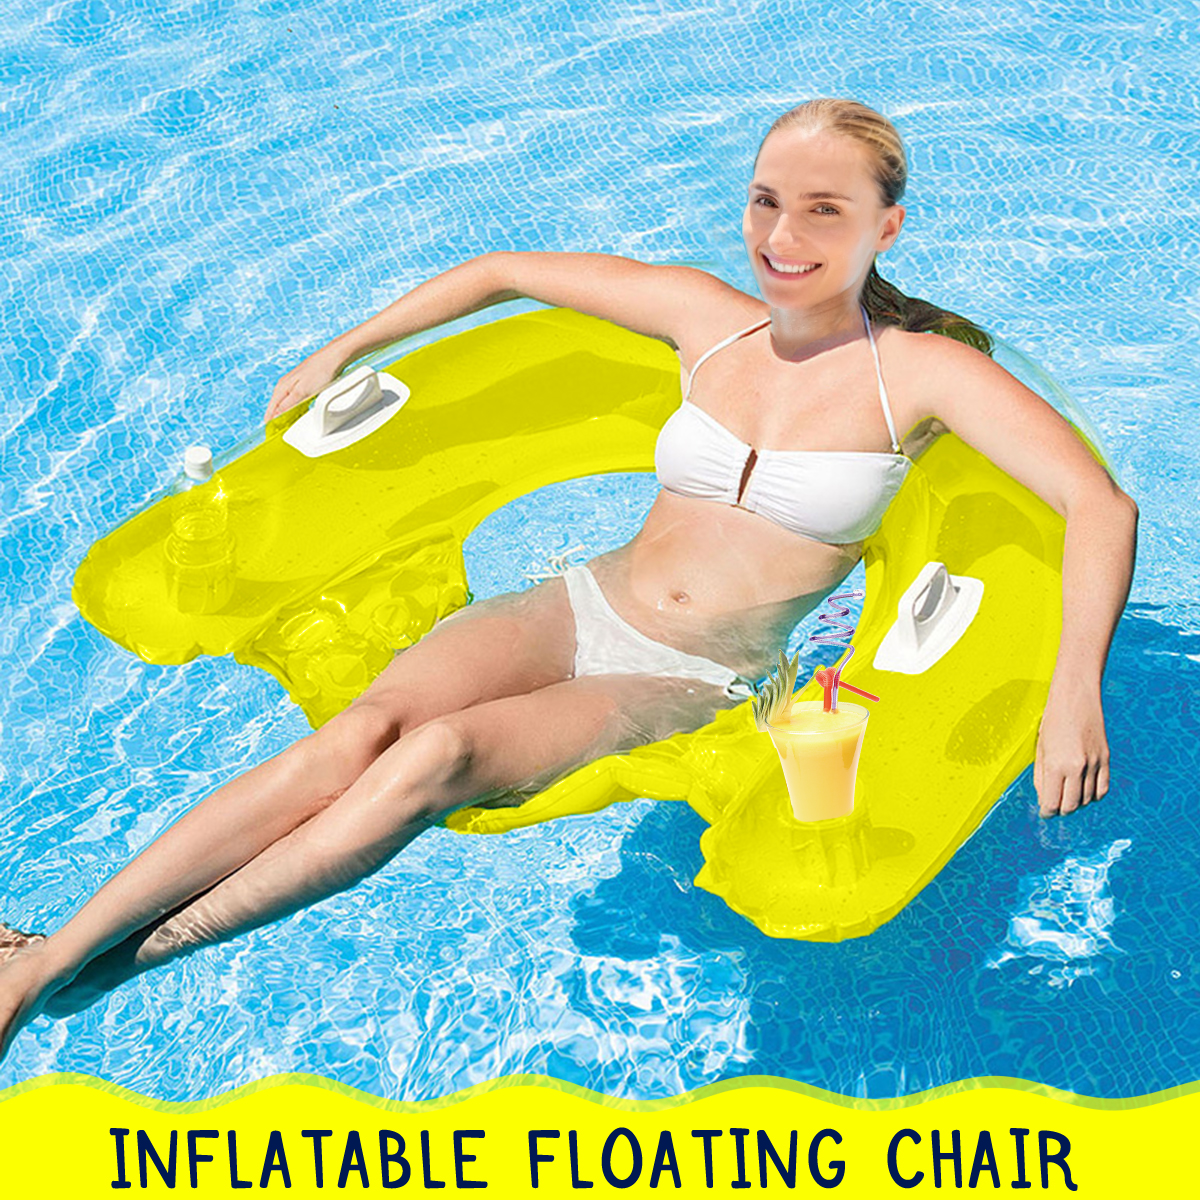 Inflatable-Mattresses-Water-Hammock-Floating-Lounge-Chairs-Swimming-Pool-Float-Mat-with-Backrest-Cup-1837392-1